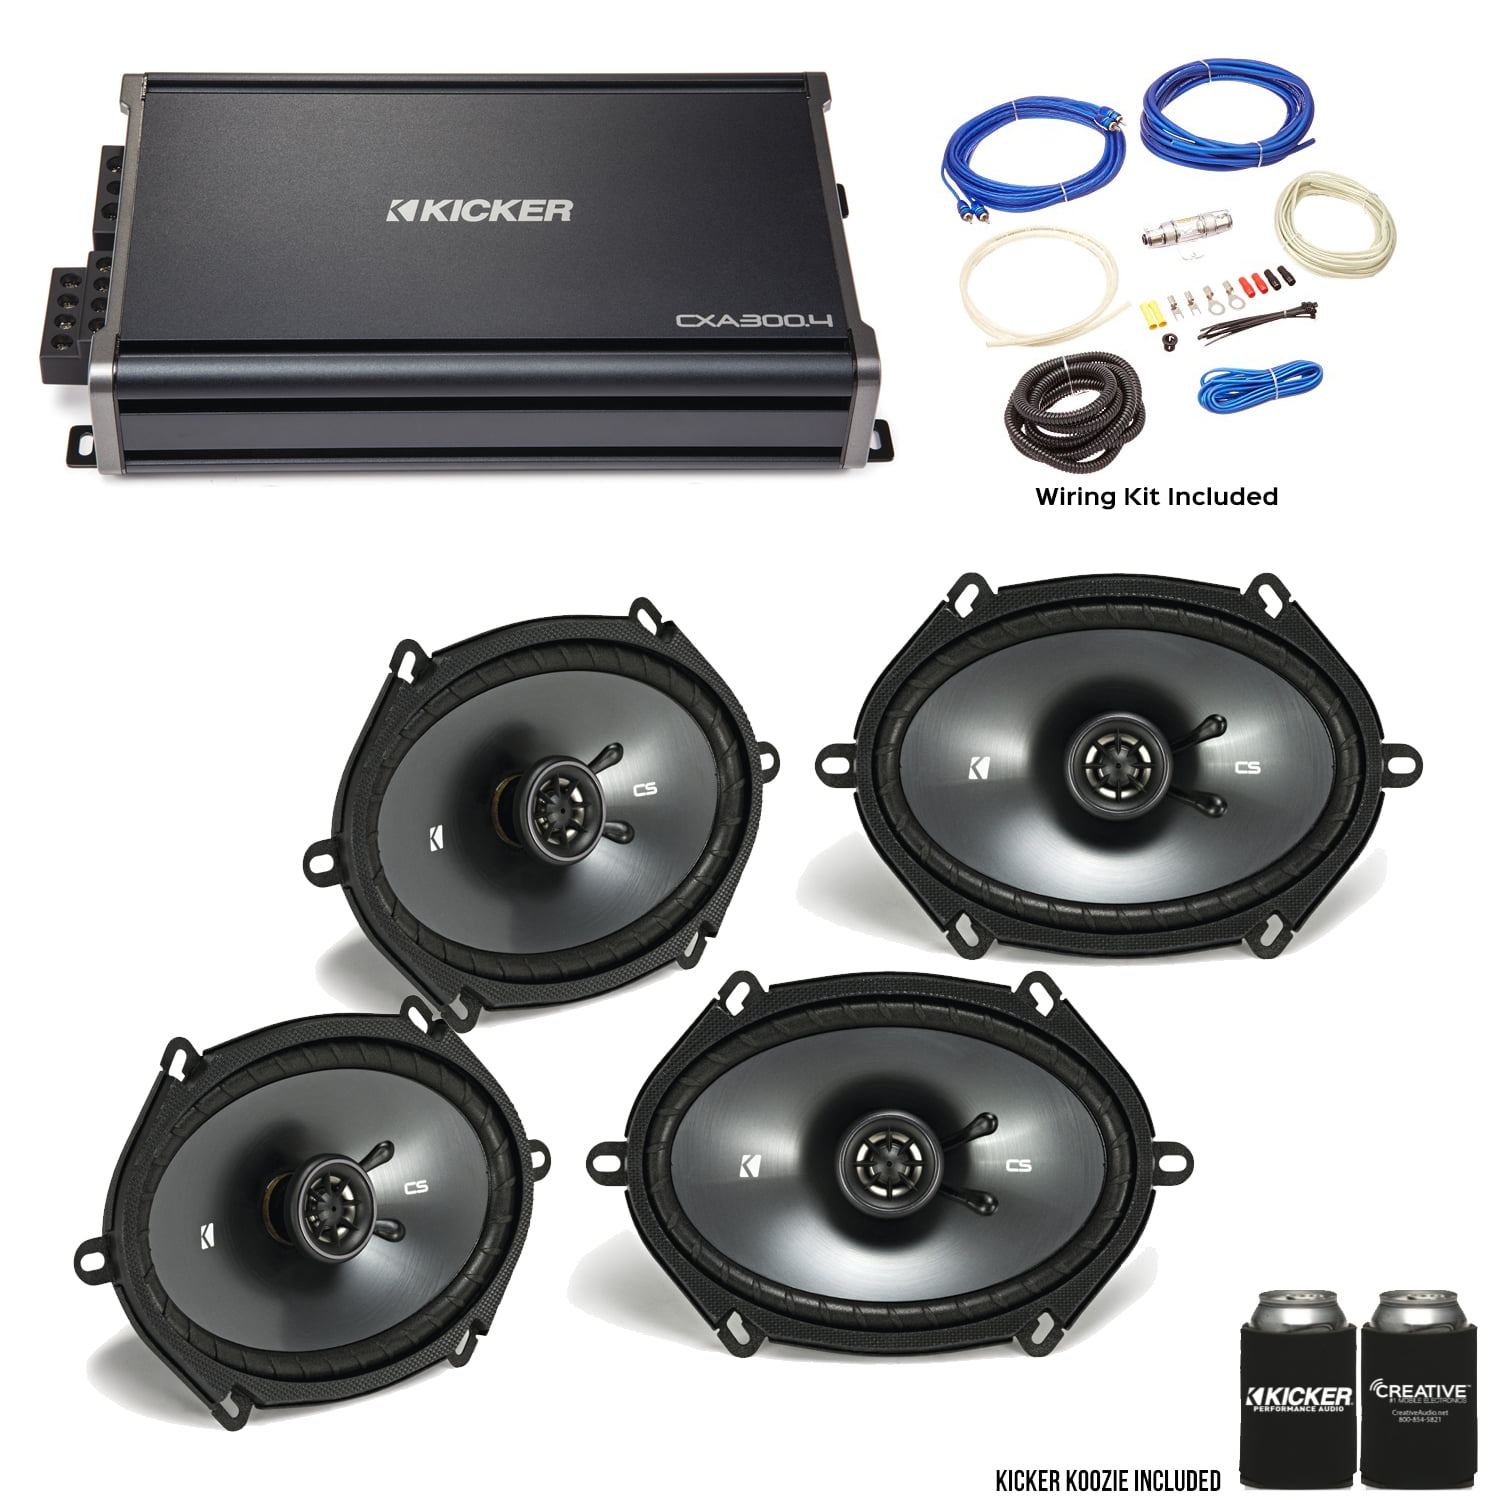 2 Pair Kicker 43DSC6804 6x8” DS-Series Speakers with 43DXA2504 DX-Series Amplifier and Wire kit 